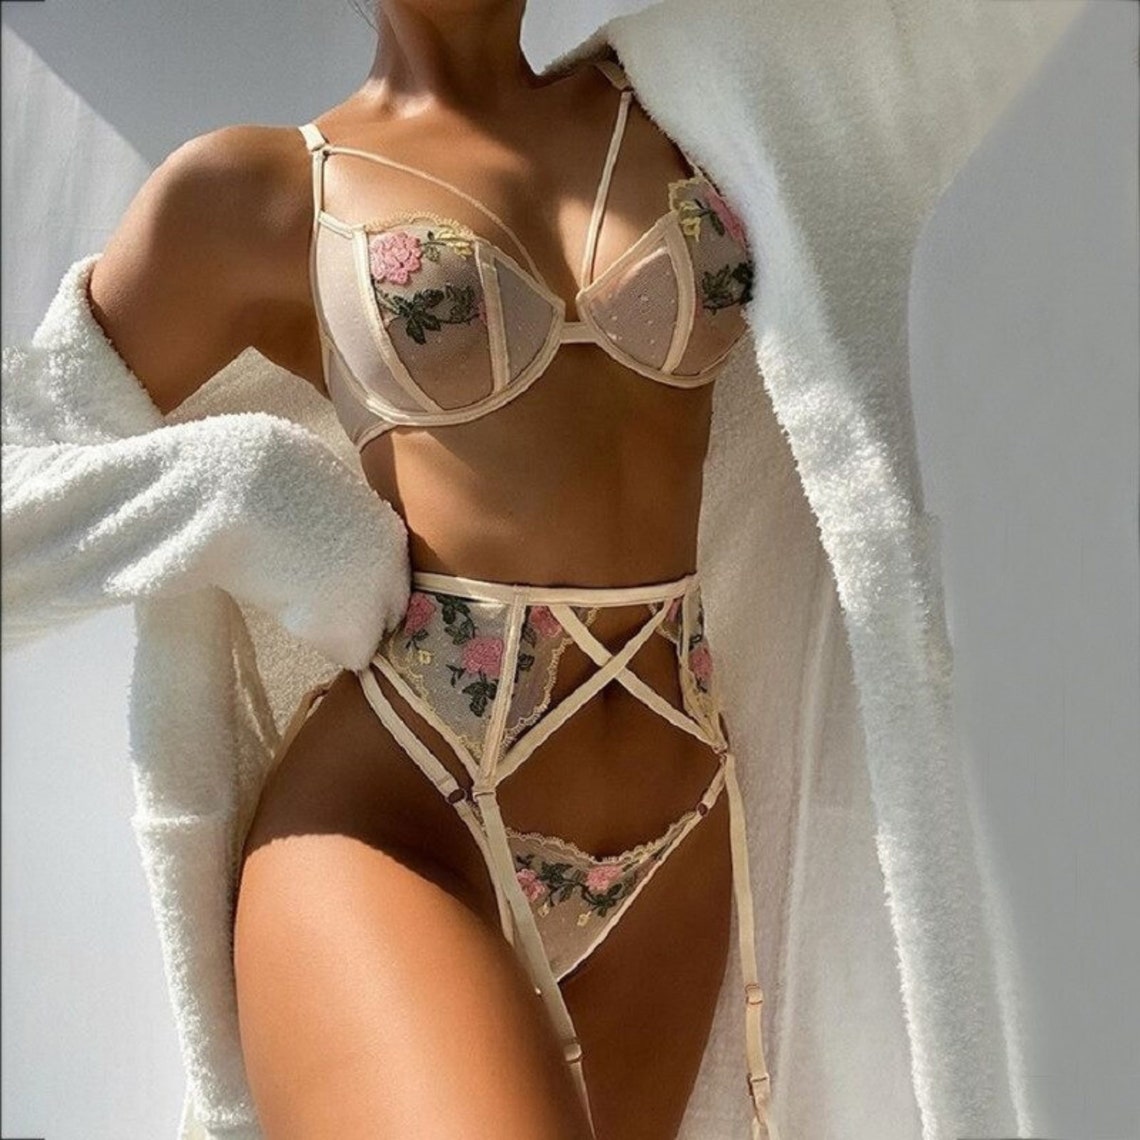 Floral Embroidery Lace Lingerie 3 Piece Set Sexy Underwear Etsy 